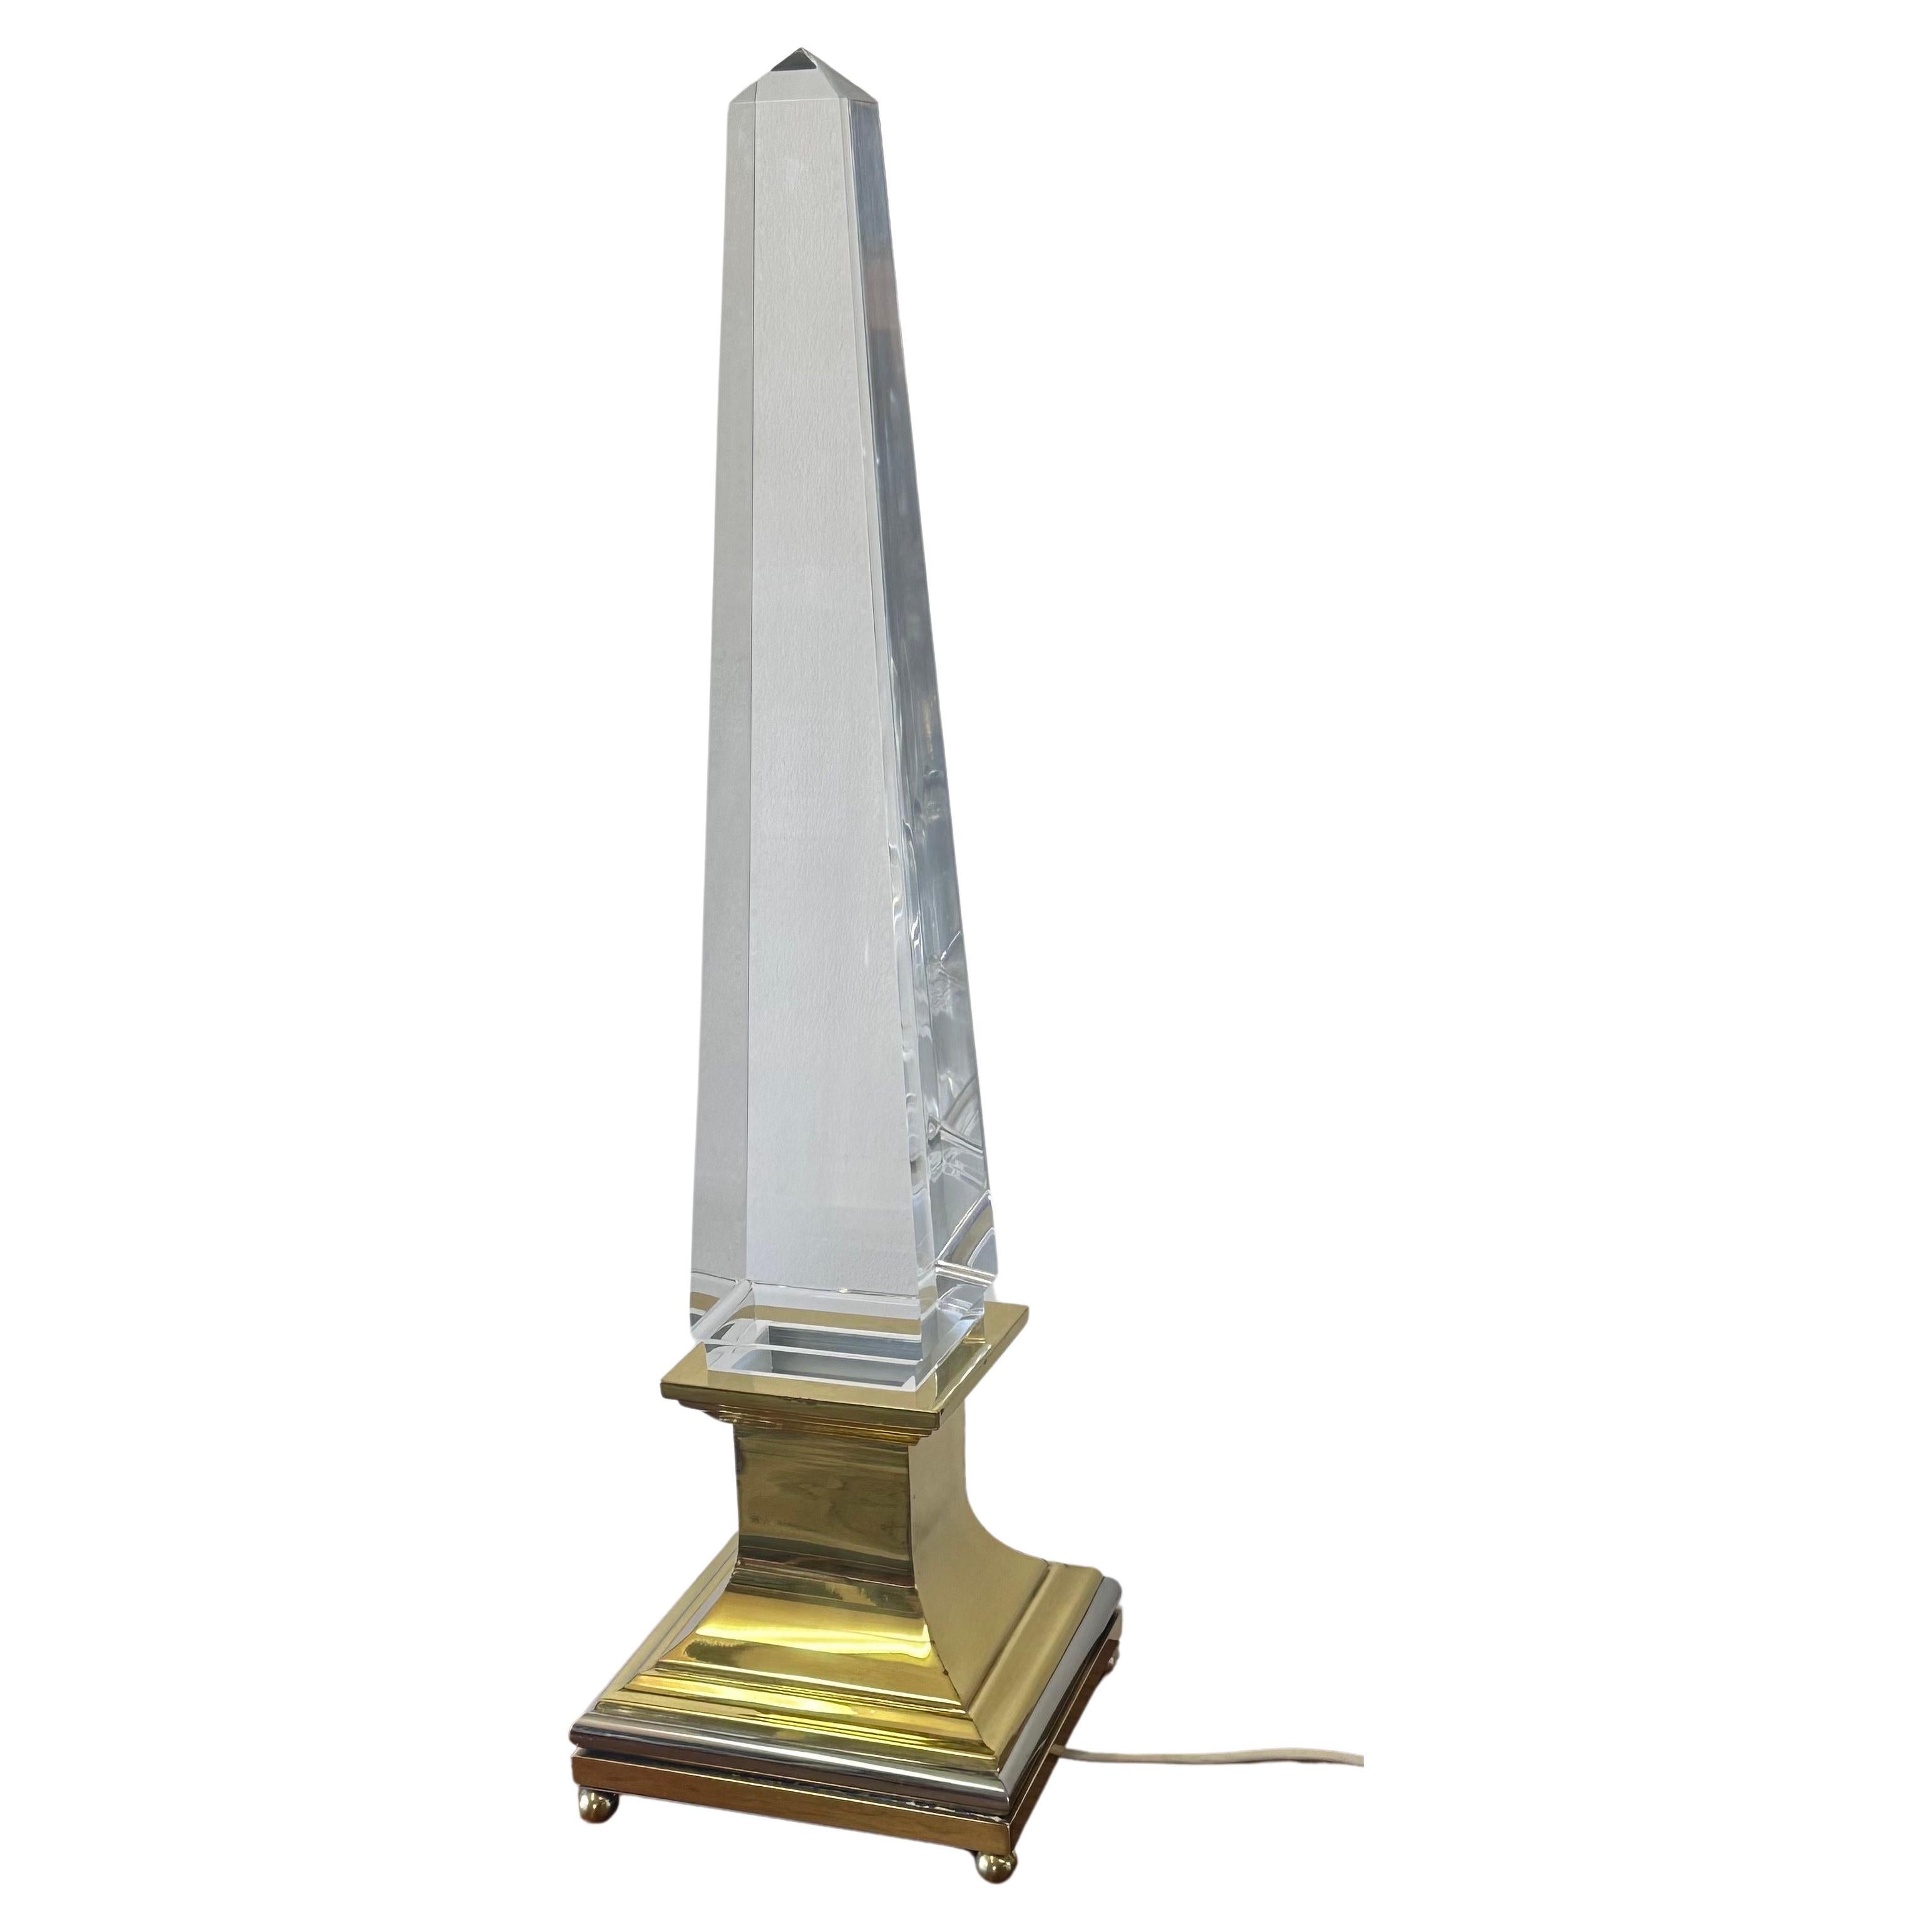 French Pair of Lucite and Brass Obelisk Table Lamps by Sandro Petti for Maison Jansen For Sale